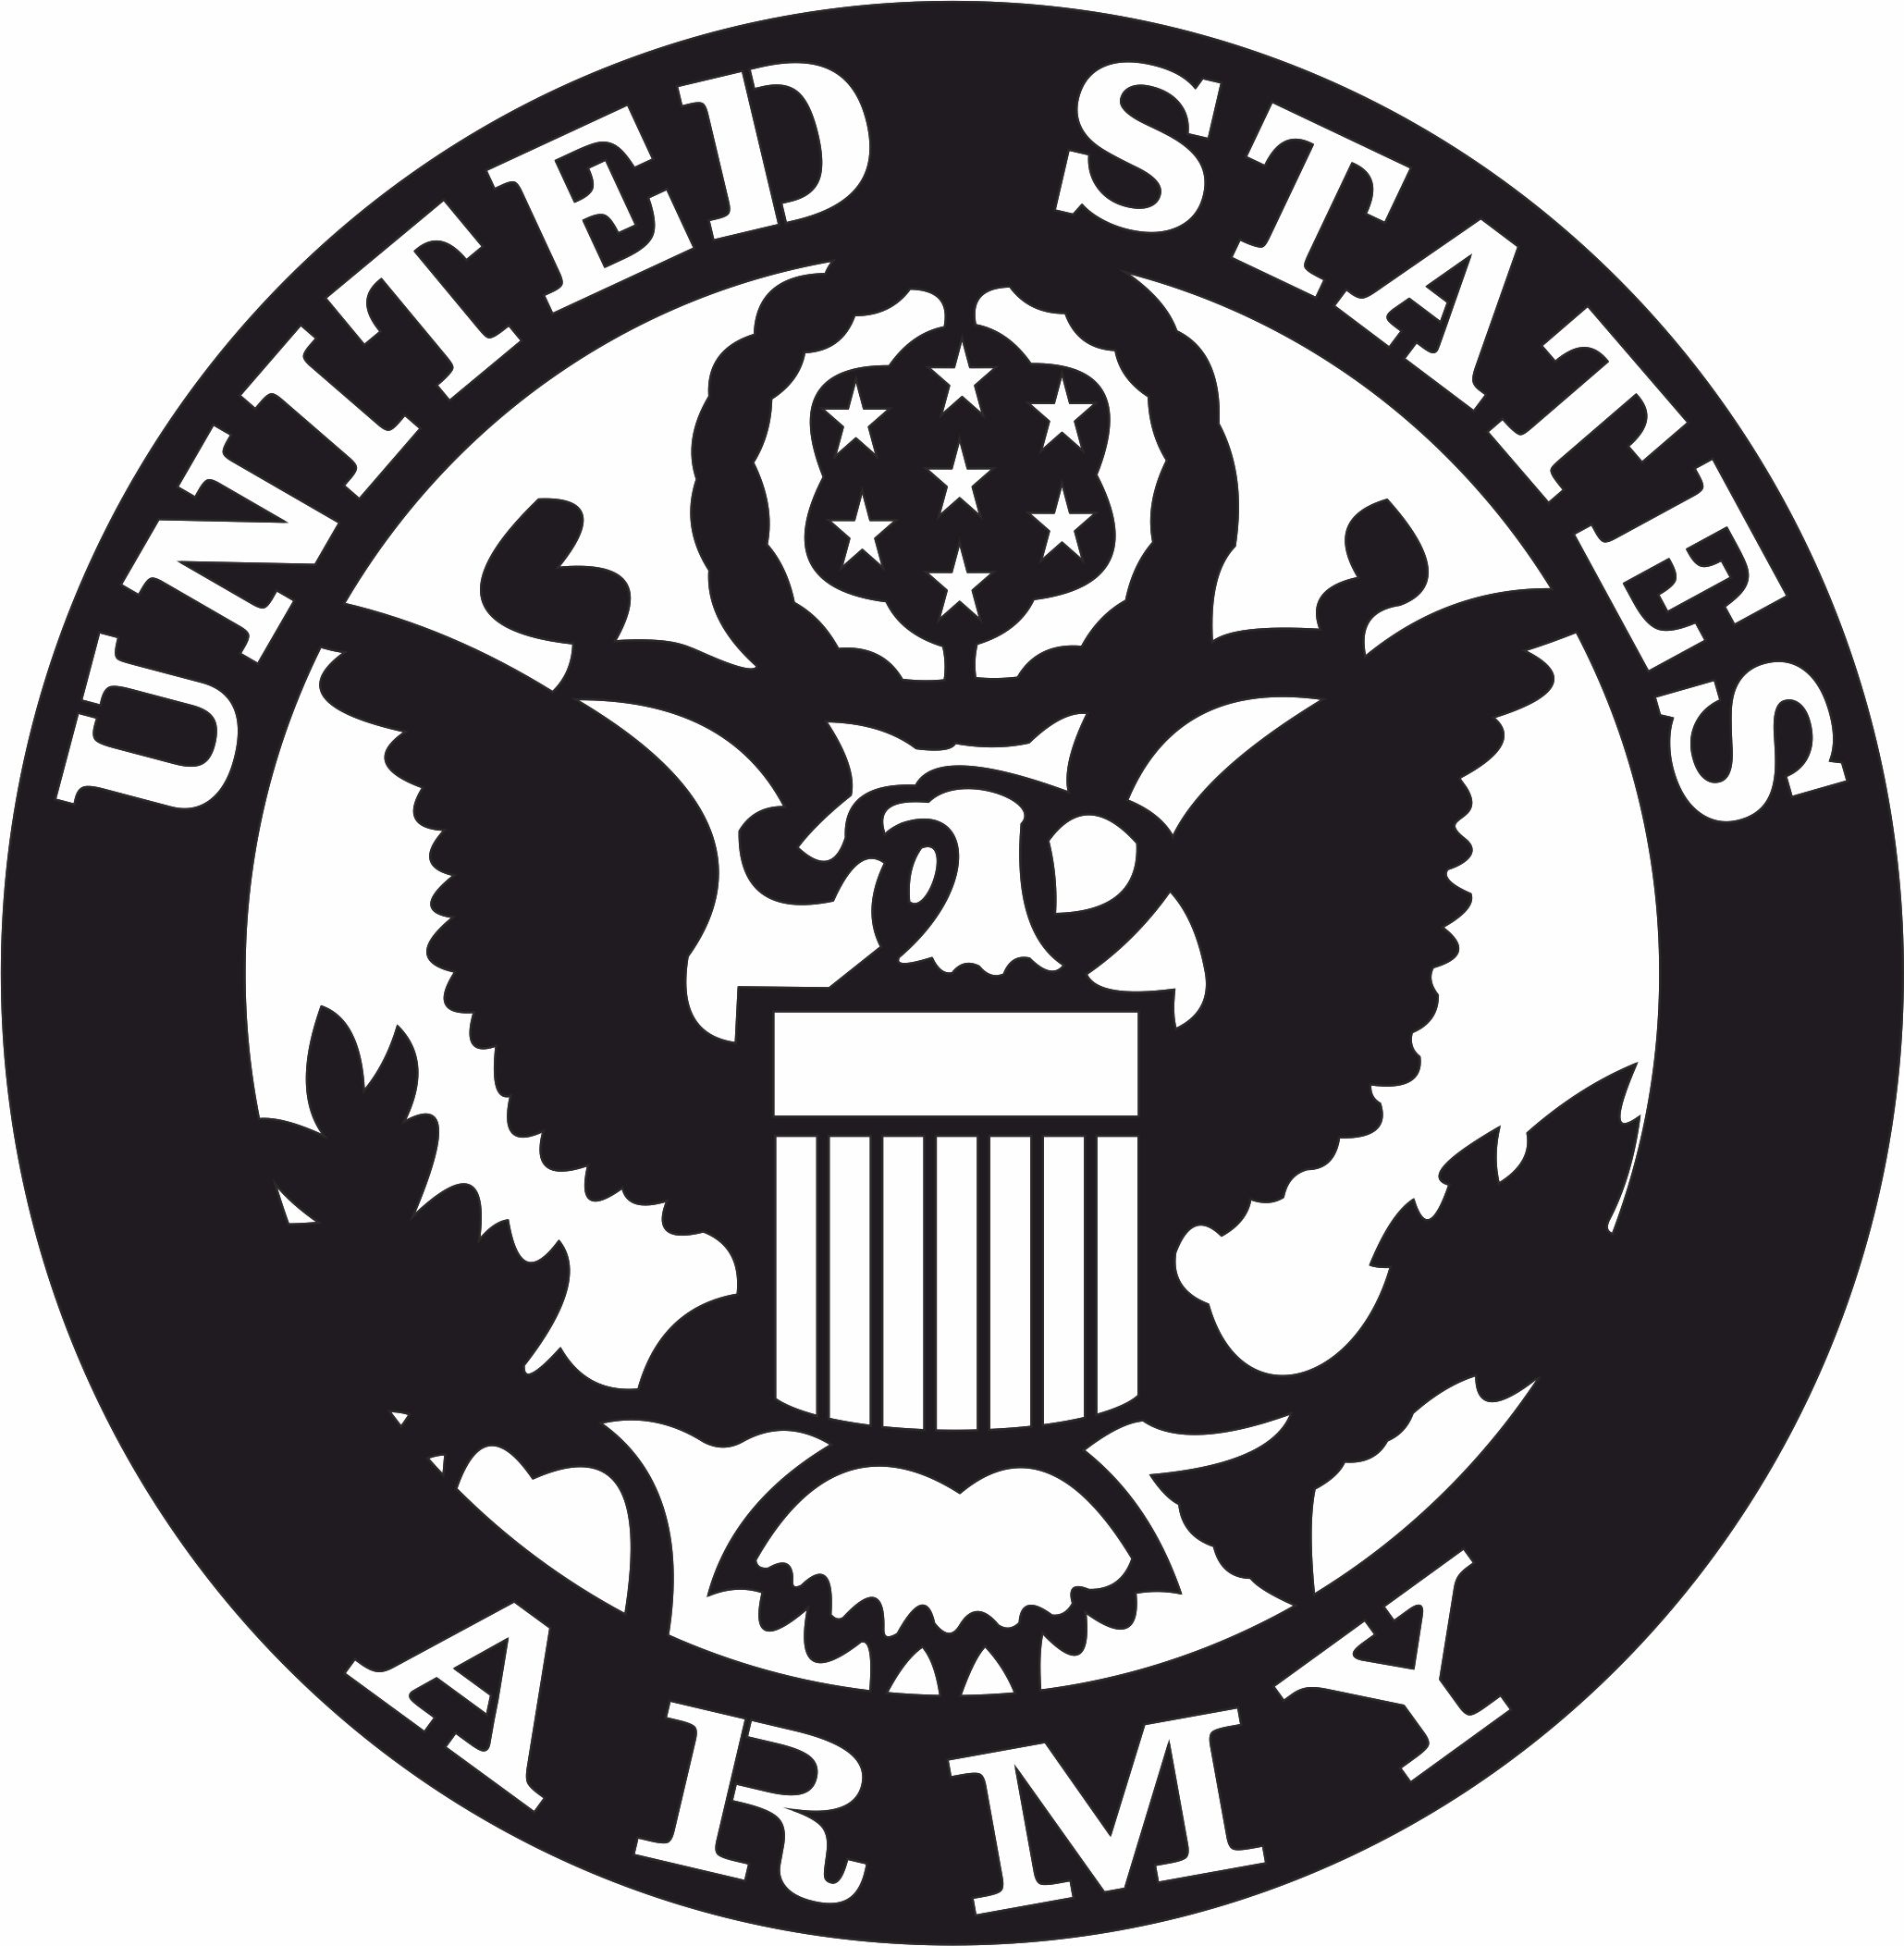 United states army logo - For Laser Cut DXF CDR SVG Files - free ...